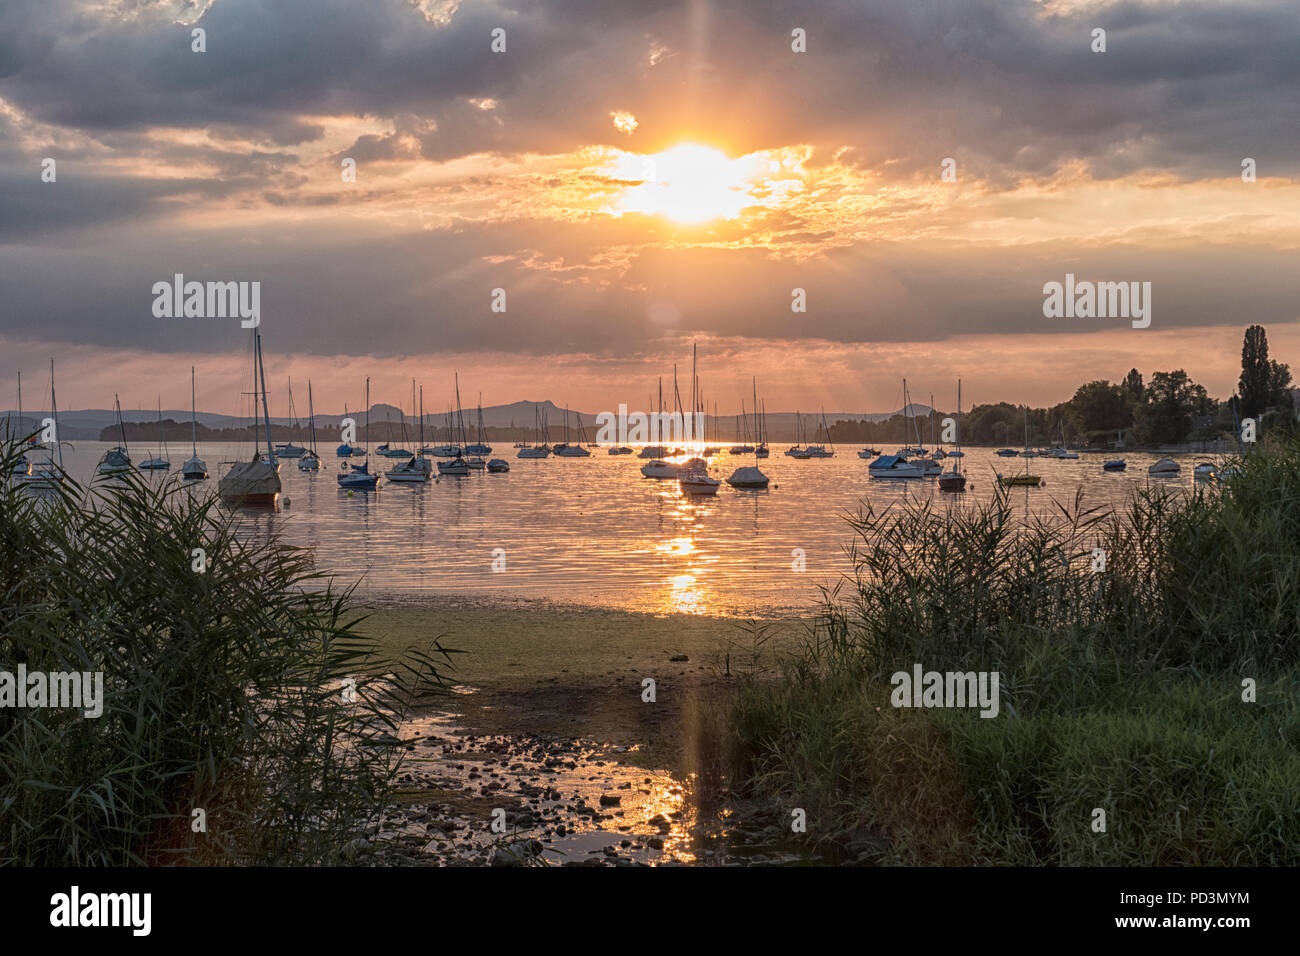 Sailing boats on Untersee, sunset, Allensbach, Lake Constance, Baden-WÃ¼rttemberg, Germany Stock Photo